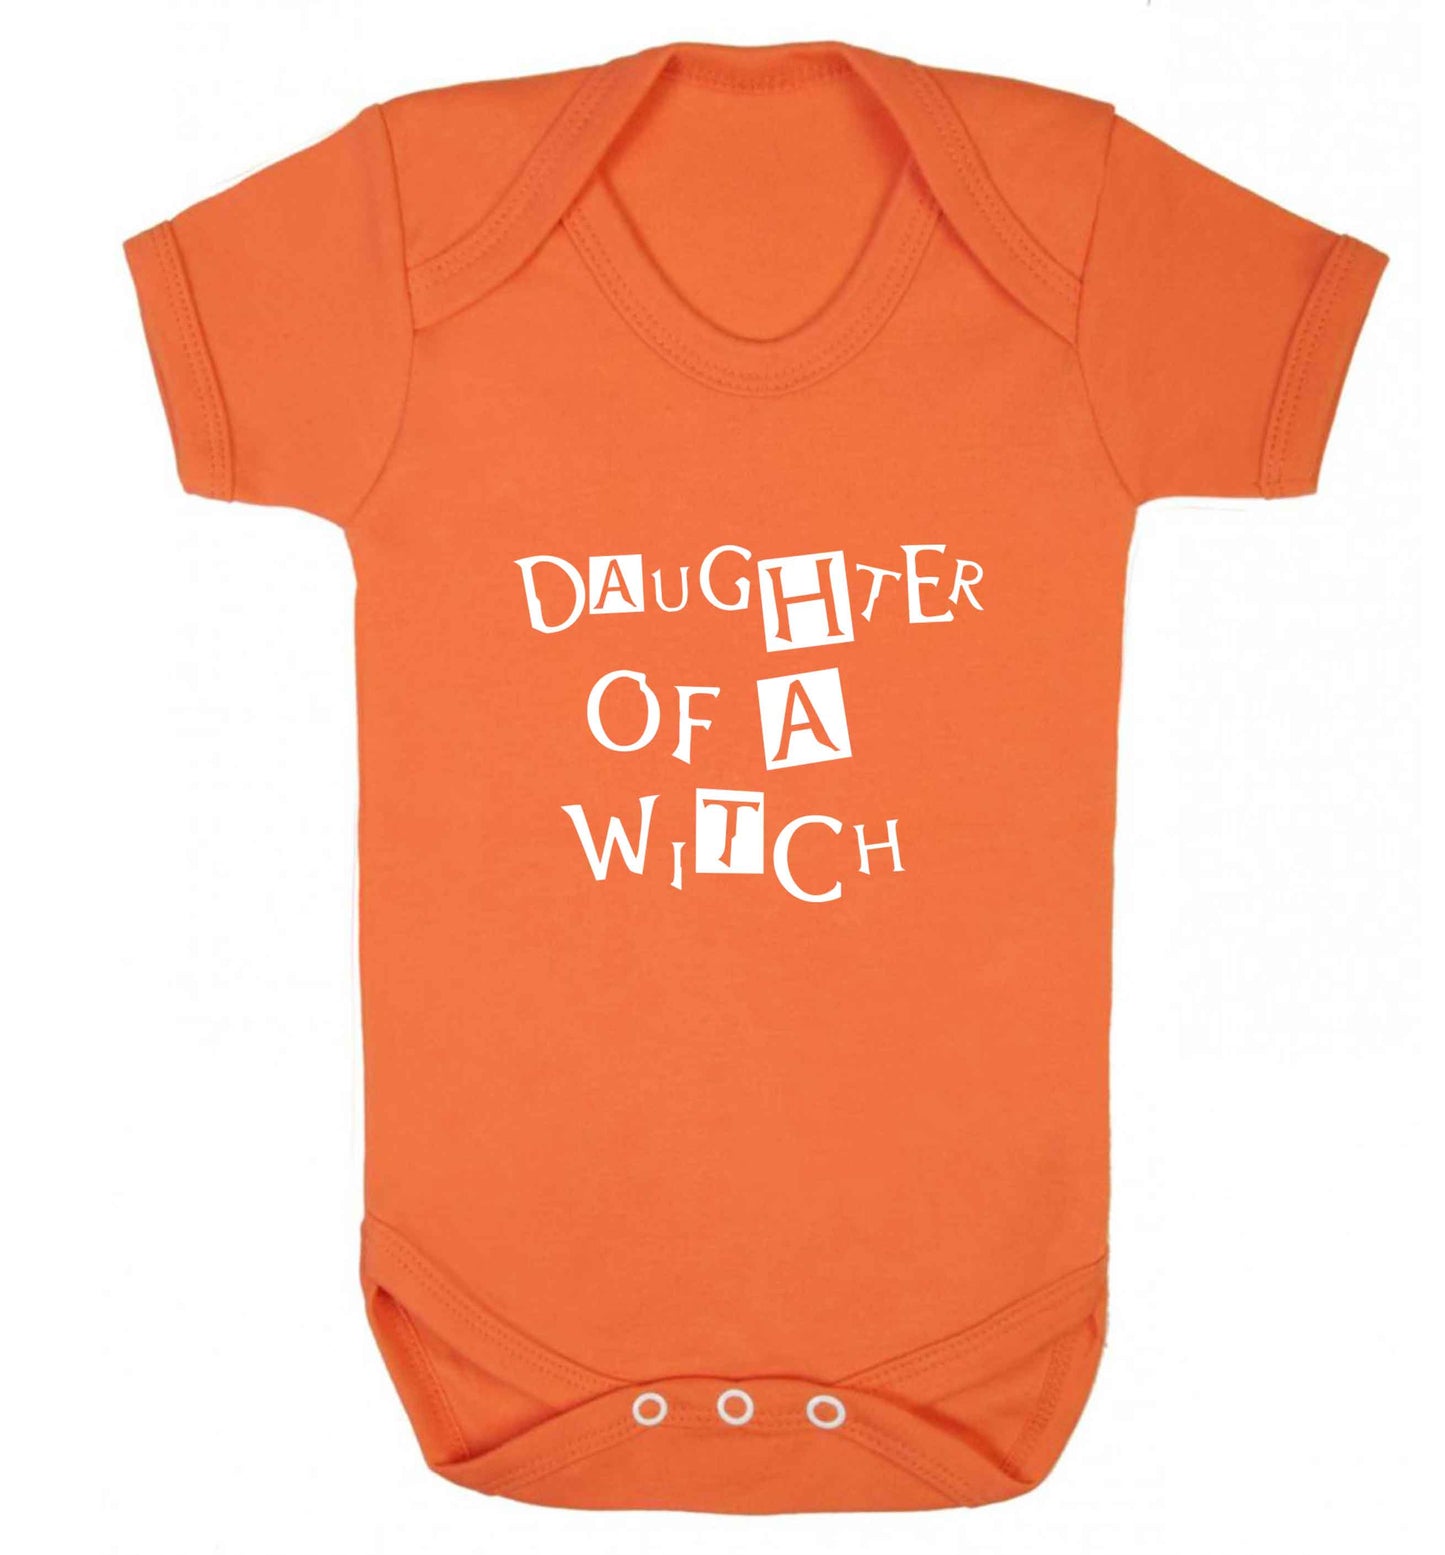 Daughter of a witch baby vest orange 18-24 months